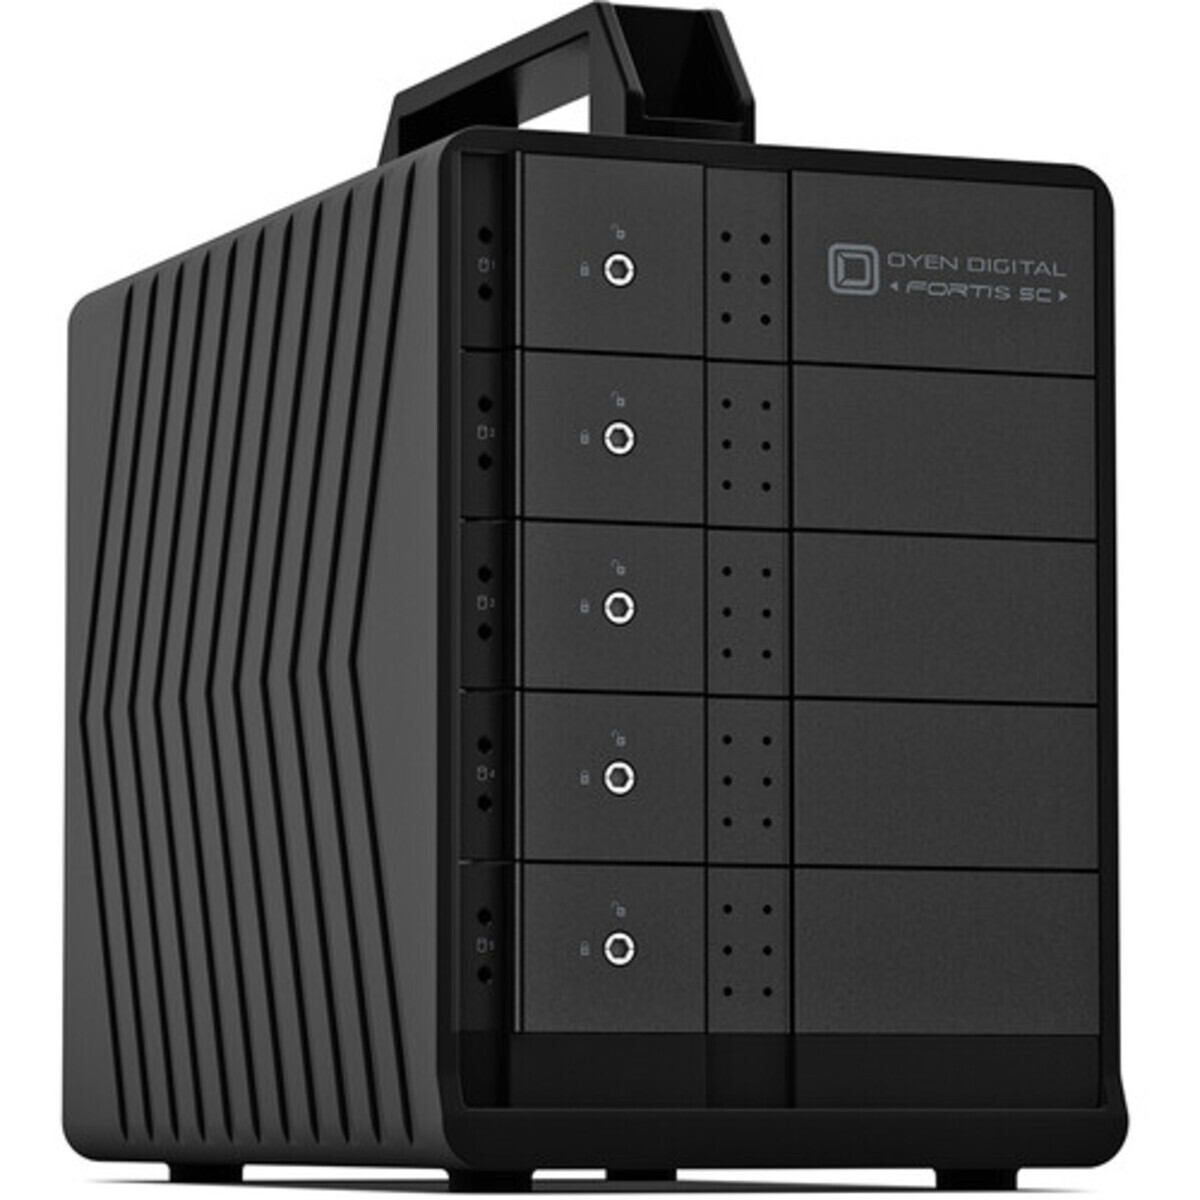 OYEN Fortis 5C DAS - Direct Attached Storage Device Burn-In Tested Configurations